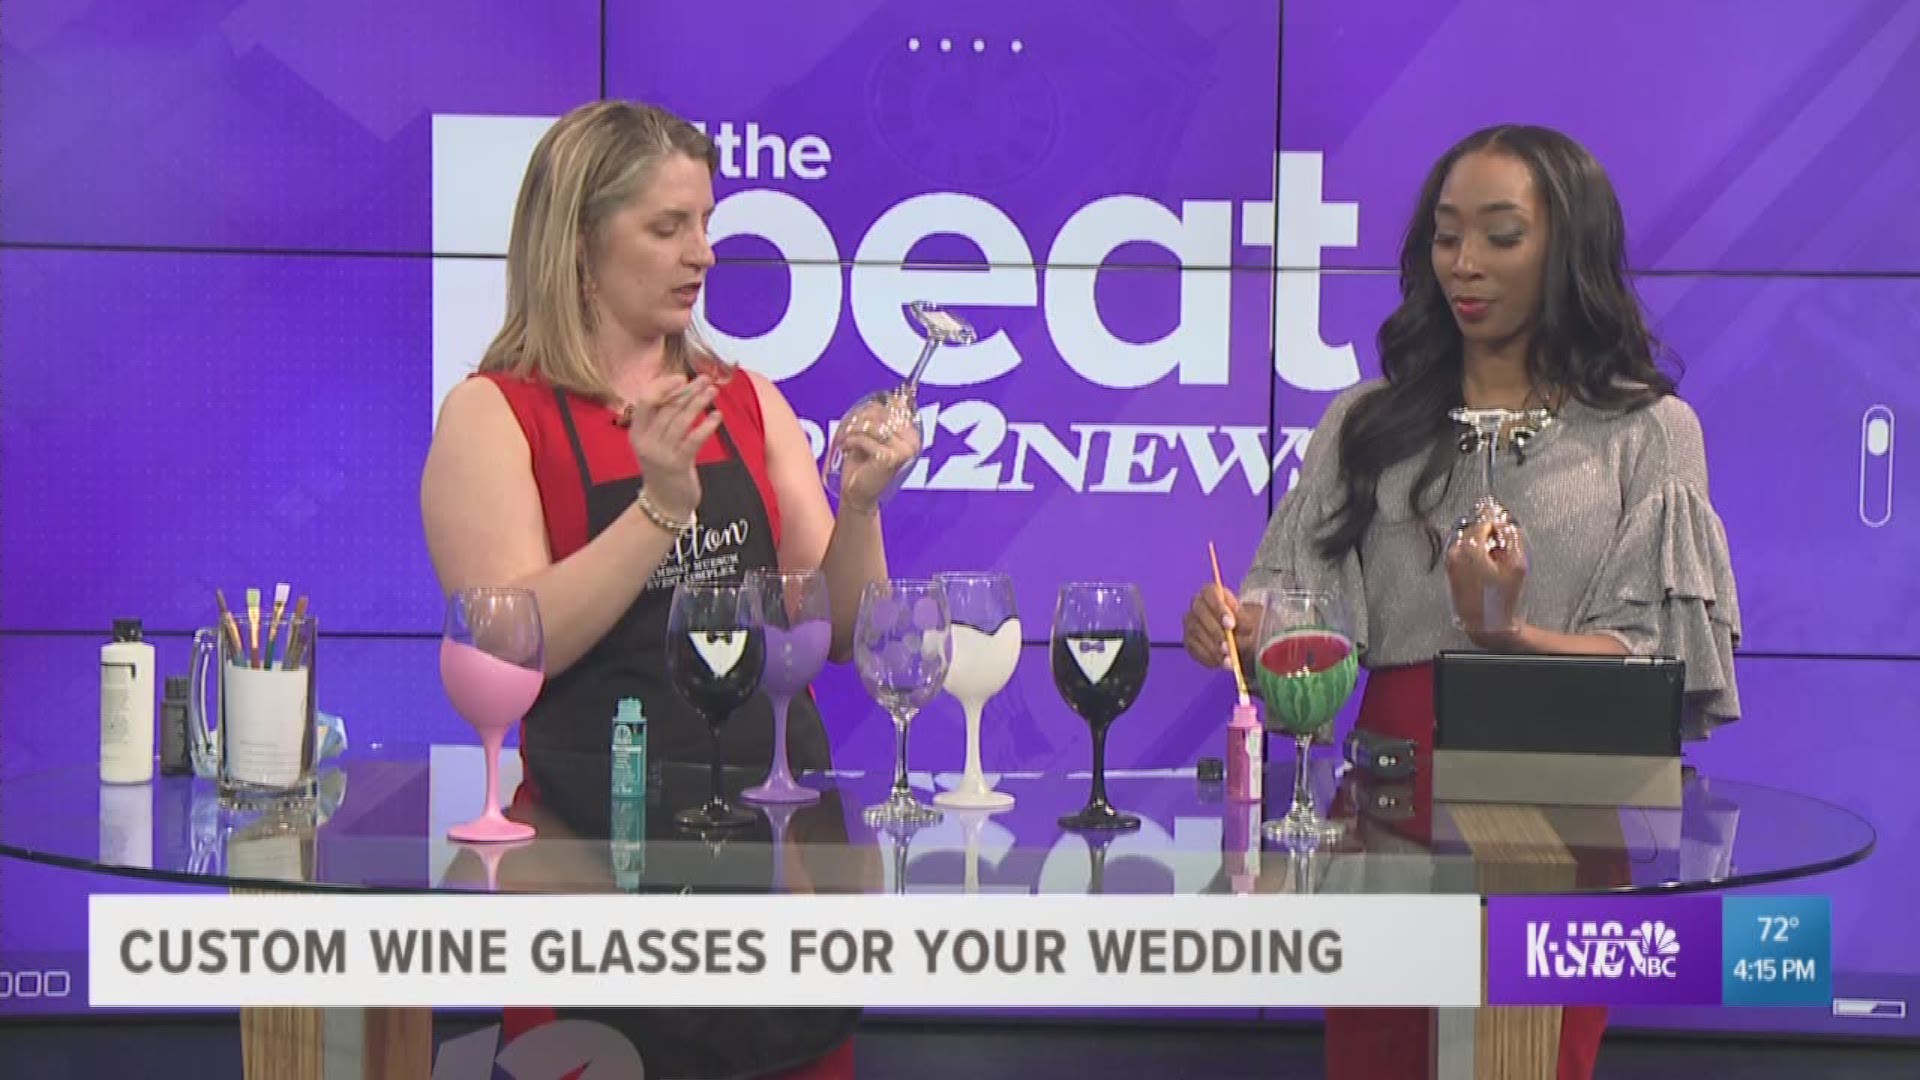 If you or one of your girlfriend's happens to get engaged, we have the perfect thing for you to do! 
Sarah Clifton shows us how to customize bridal wine glasses!